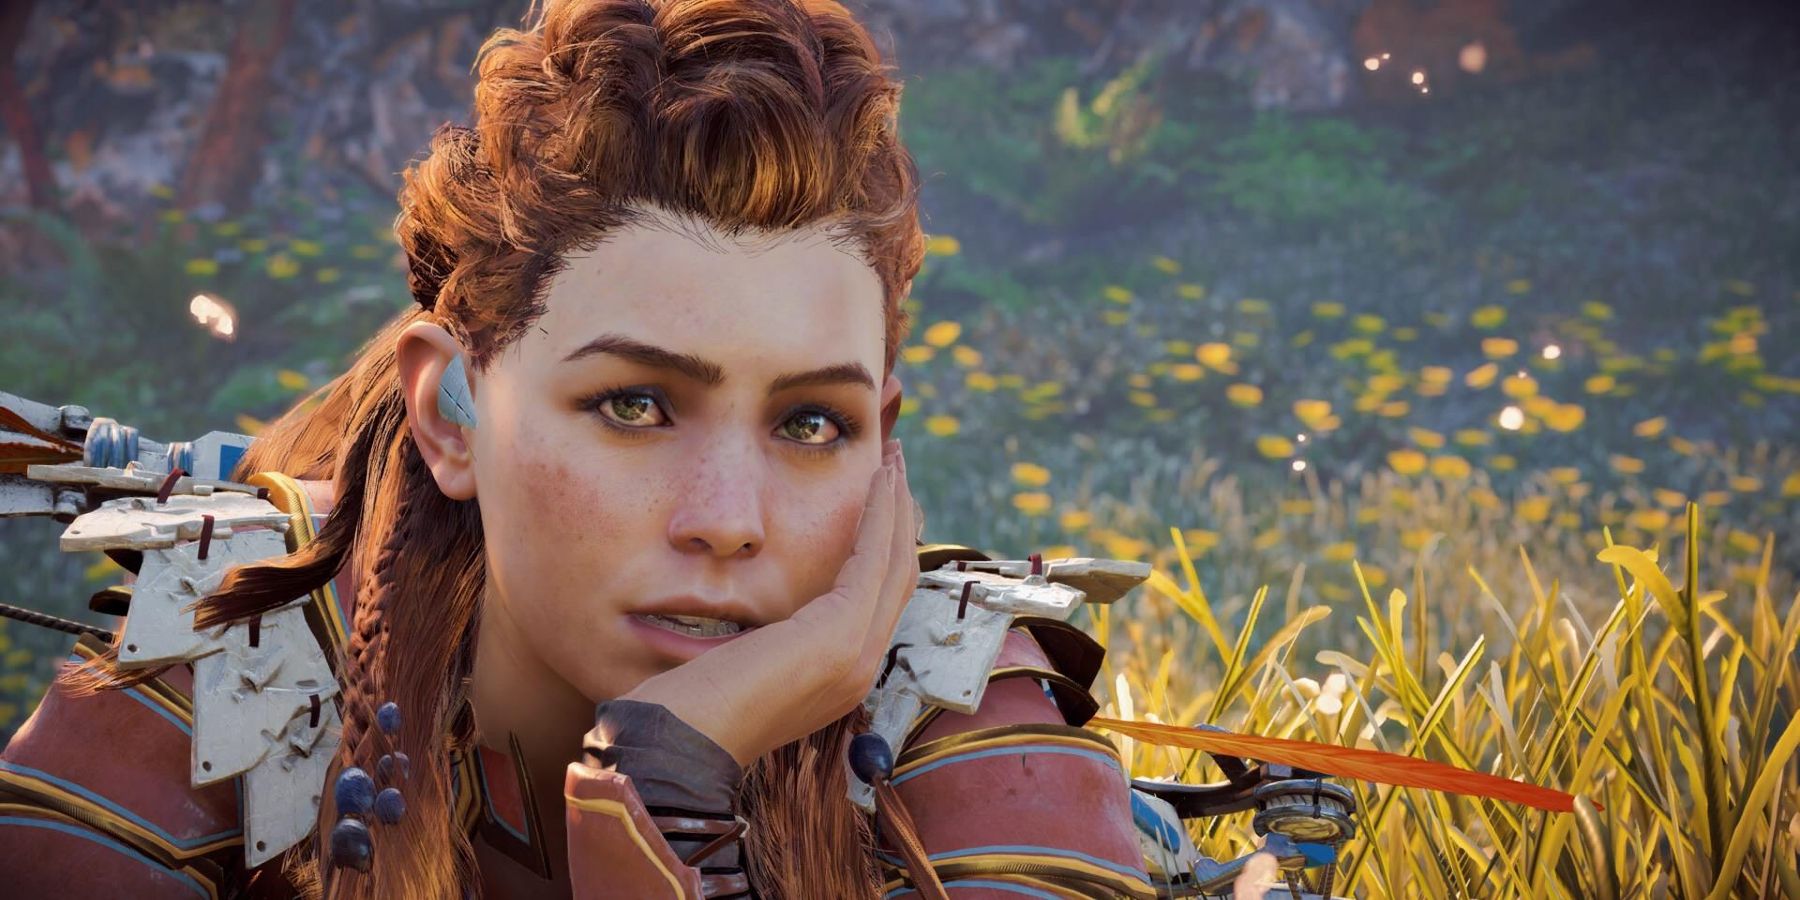 Horizon May Have A Protagonist Issue To Deal With In The Future